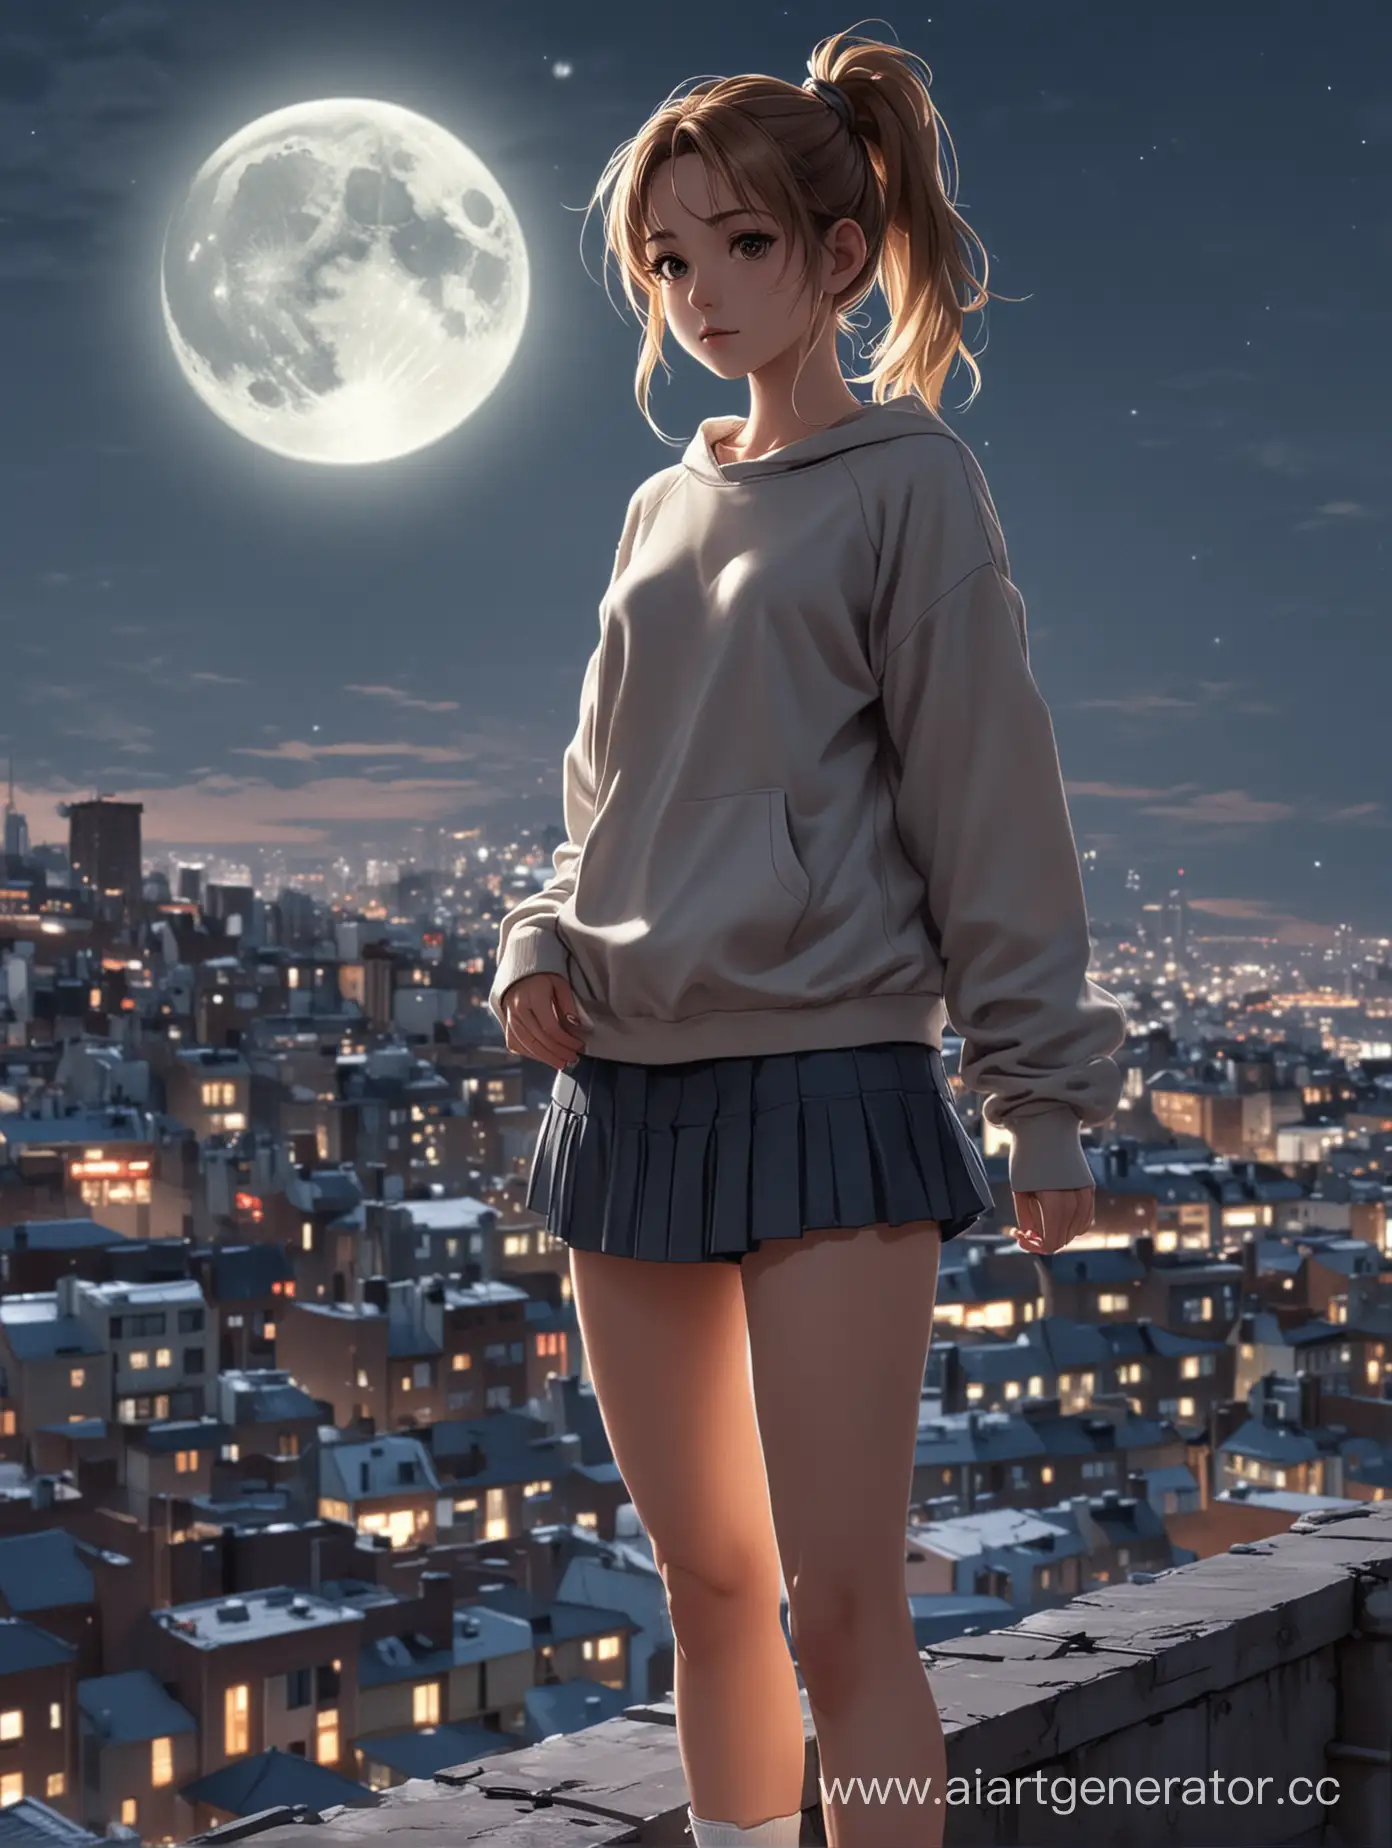 anime girl :: hands in pockets :: standing on the roof of a building :: night :: full moon :: city :: ponytail :: short skirt :: sulfur sweatshirt :: sneakers :: poster :: cinematic :: anime style :: detailed eyes :: realistic drawing :: highly detailed : : ultra high quality model :: hyperdetailed :: correct hand anatomy :: beautiful hands :: whole fingers